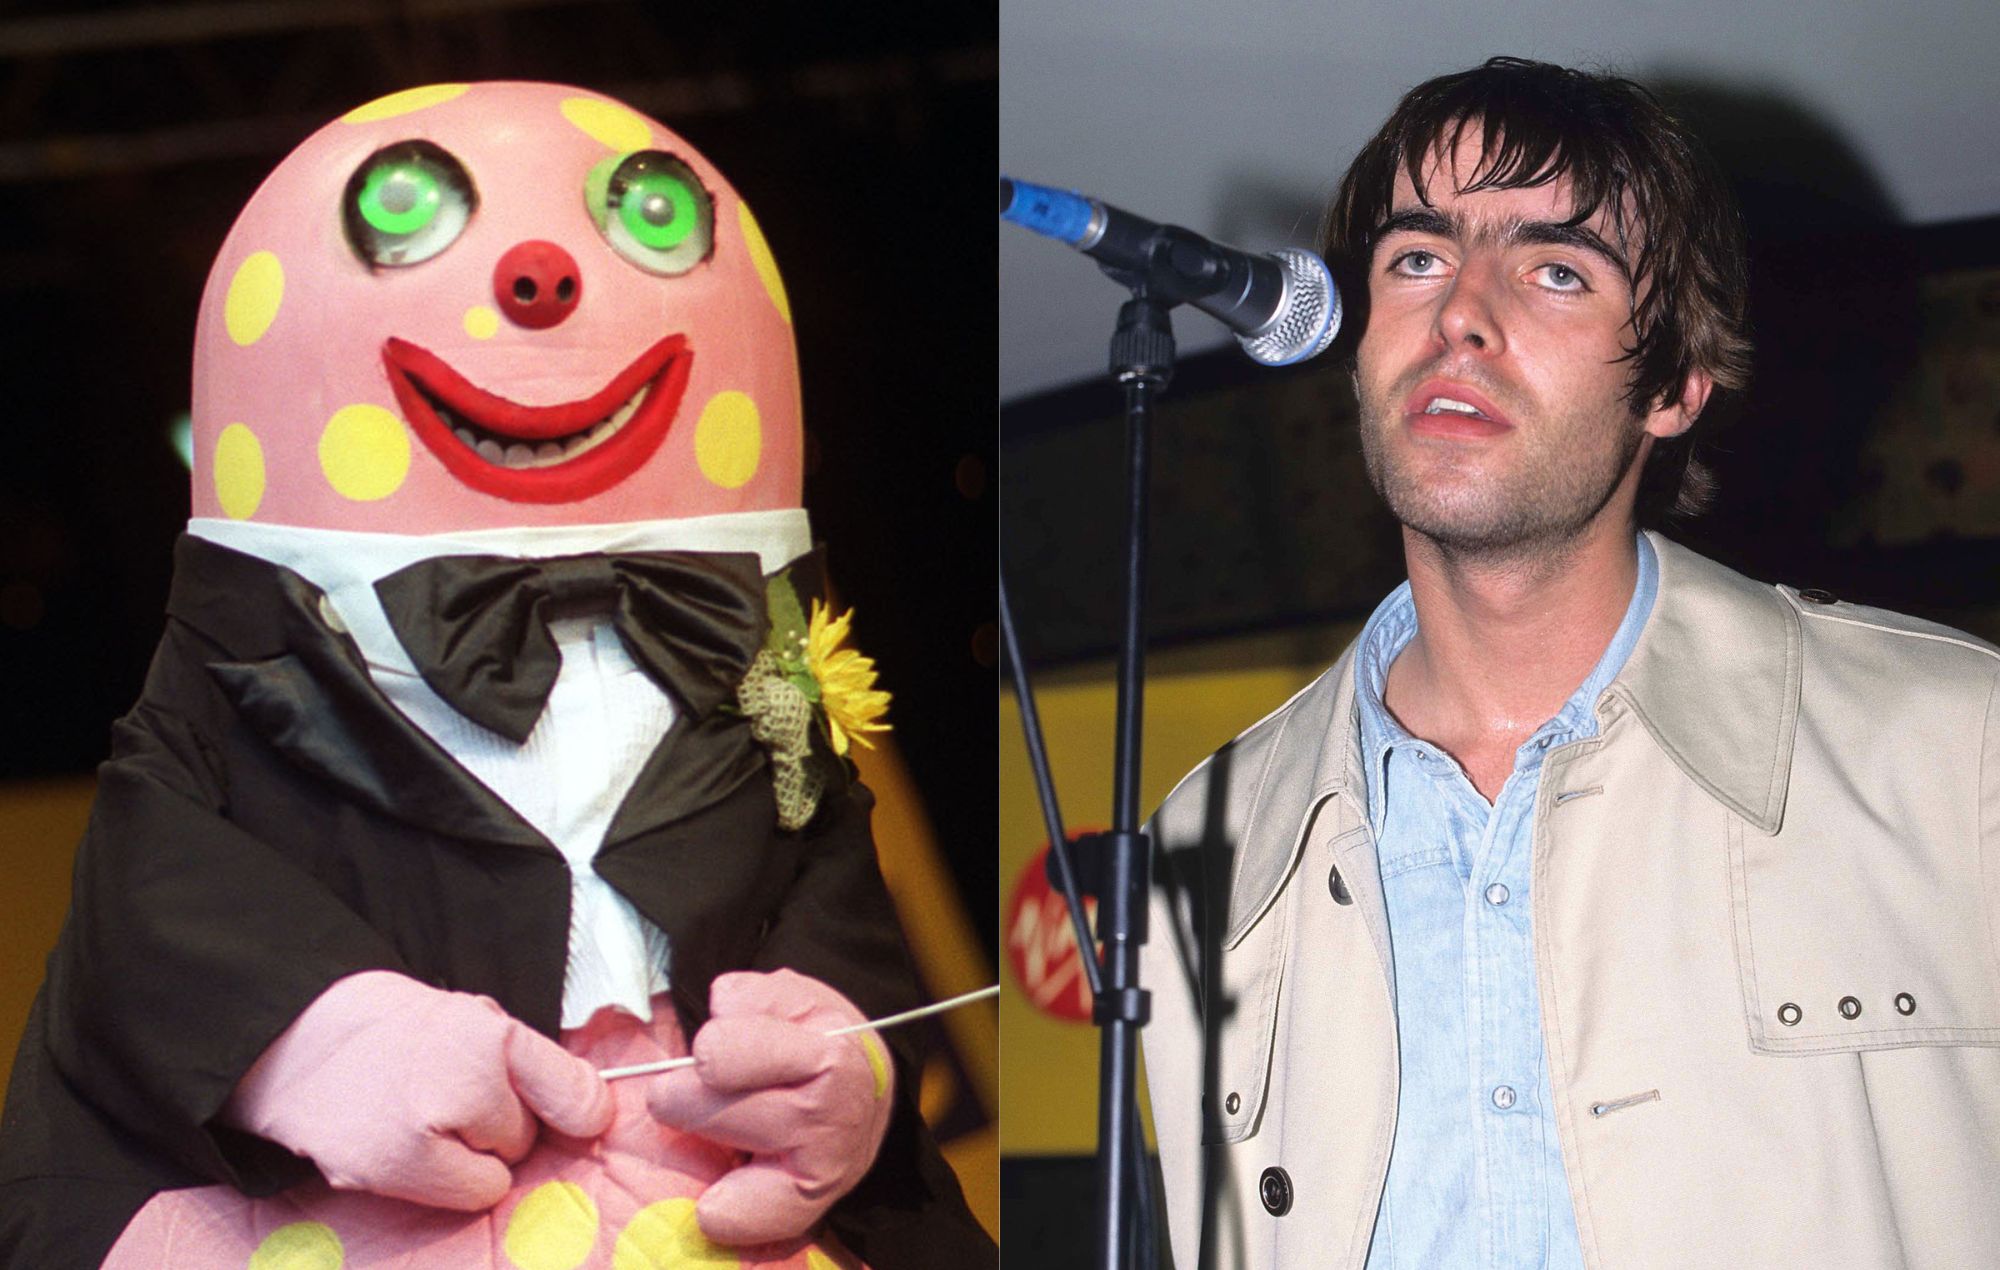 Anyway, here’s ‘Wonderwall’ – covered by Mr Blobby